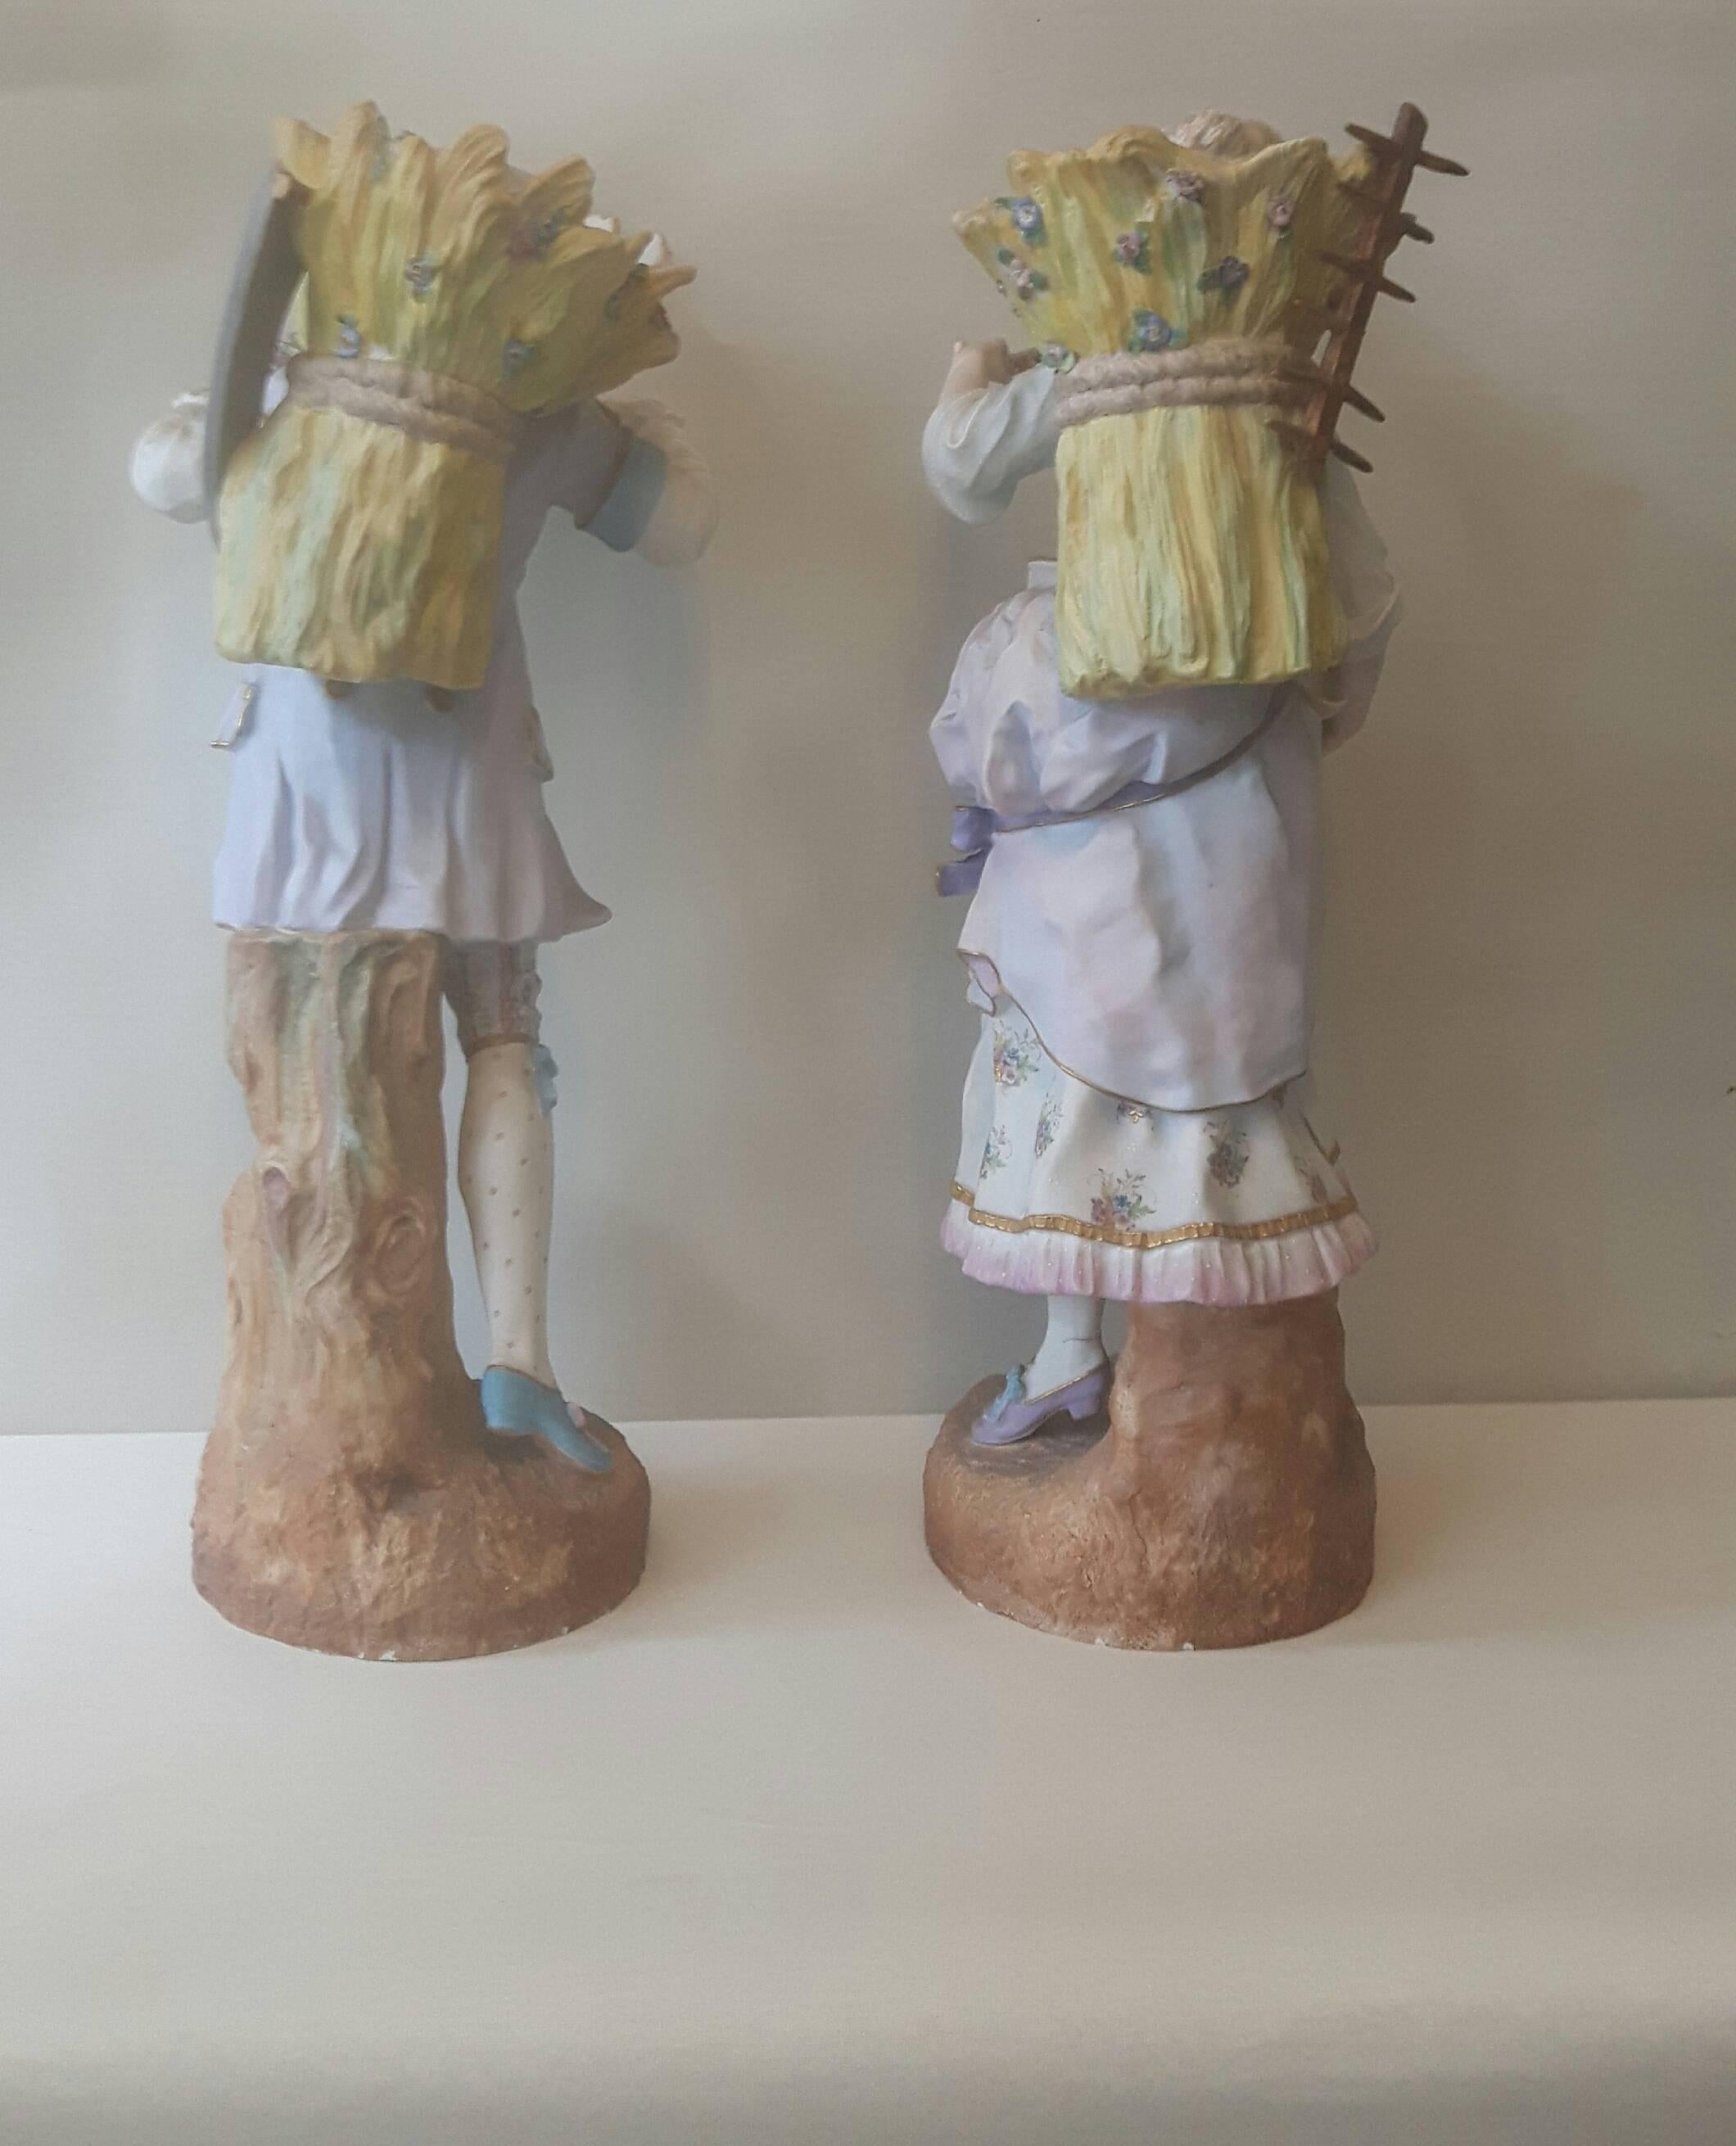 A pair of bisque porcelain figures of a courting couple in C18 dress, carrying wheat sheaves on their backs, she holding her hat with flowers in, her companion holding out a small bouquet of flowers to her.
French, circa 1890.